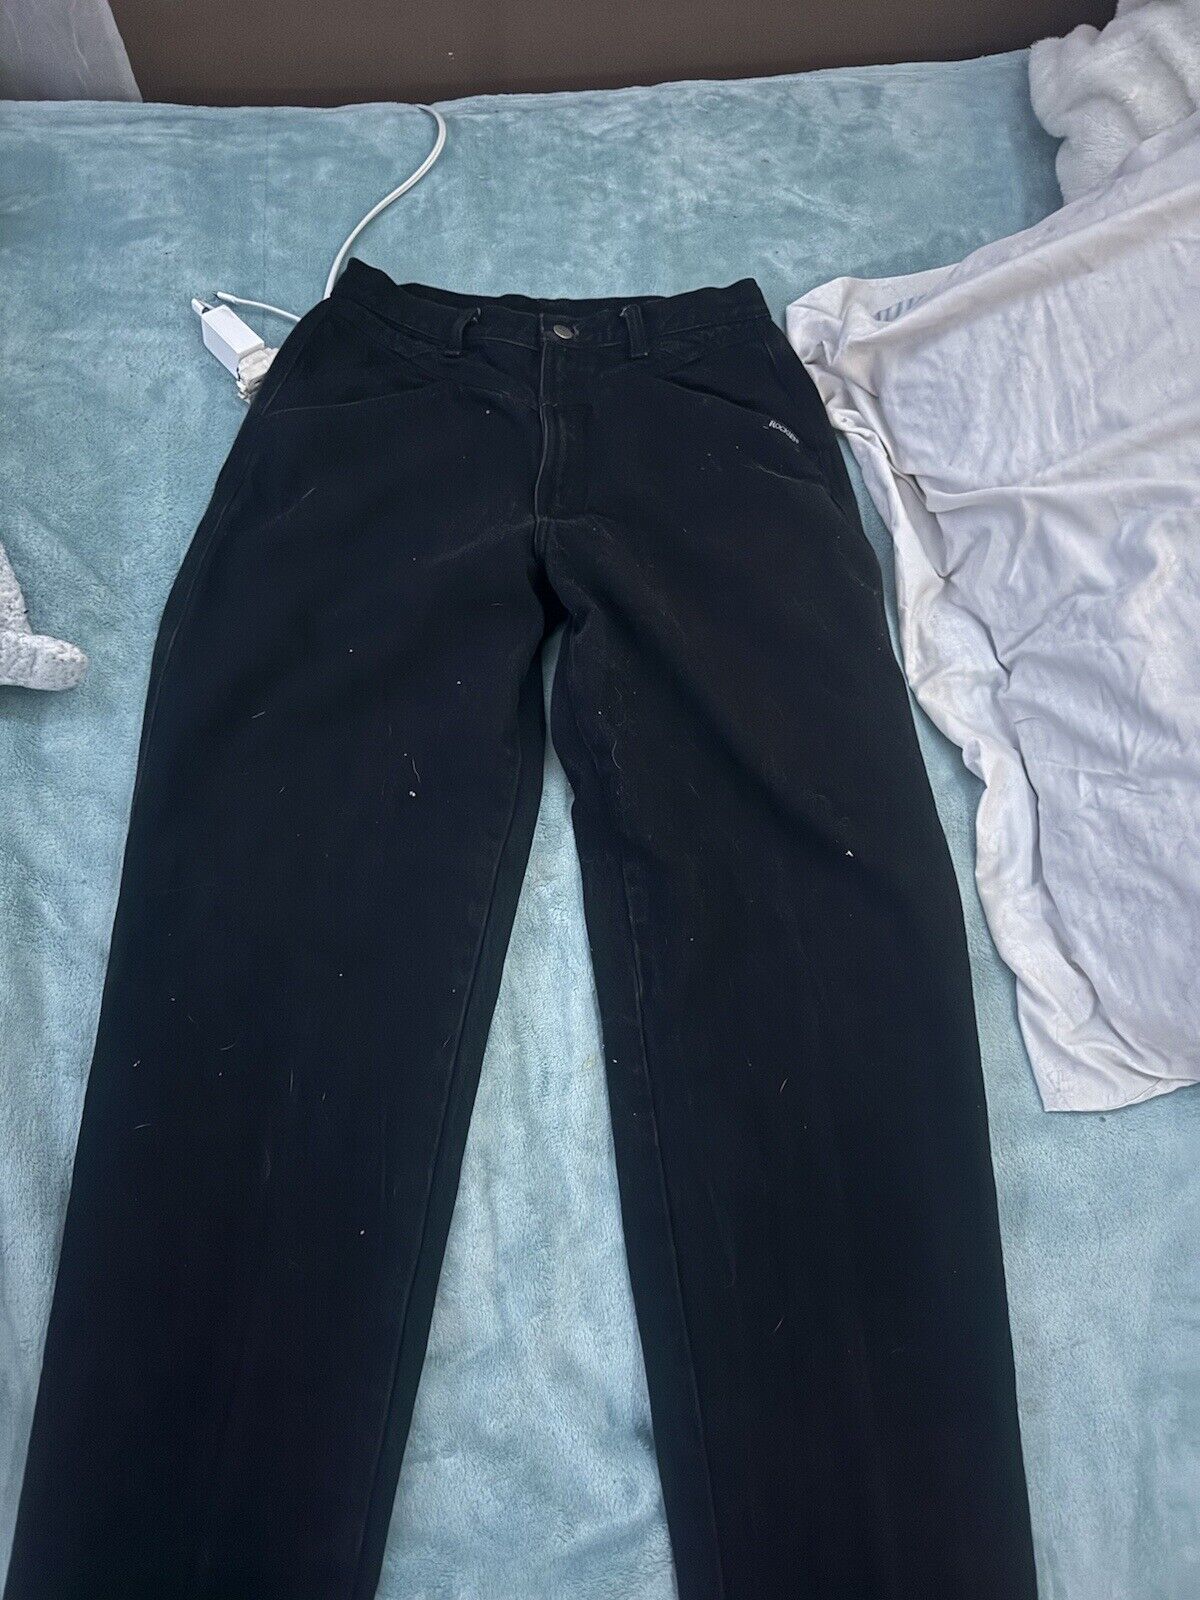 VTG Rocky Mountain Jeans size 32 length 34 black (grandma bought and never wore)